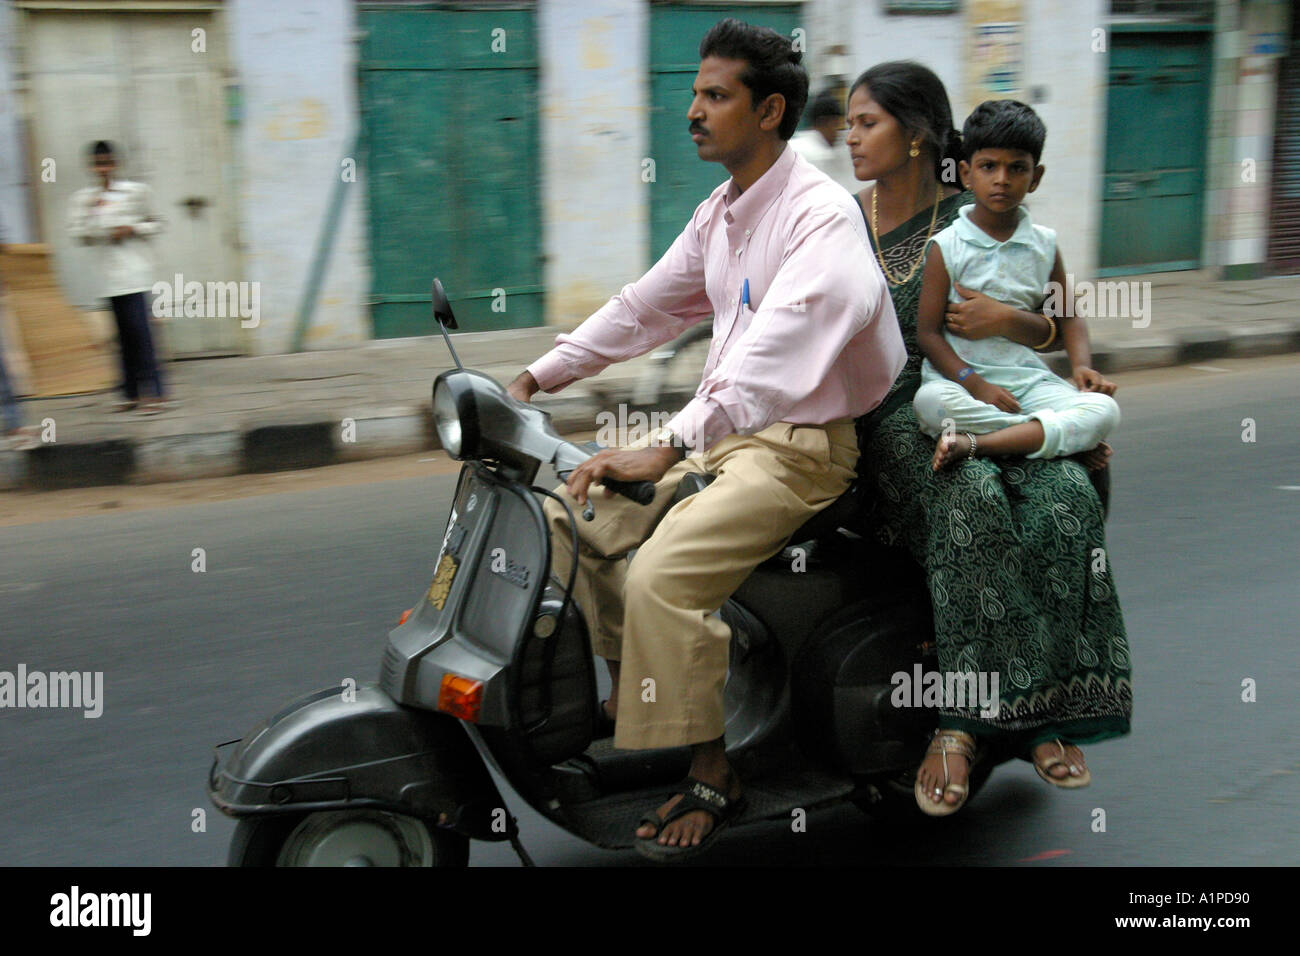 A family on a motorcycle in Chennai Madras in India Stock Photo